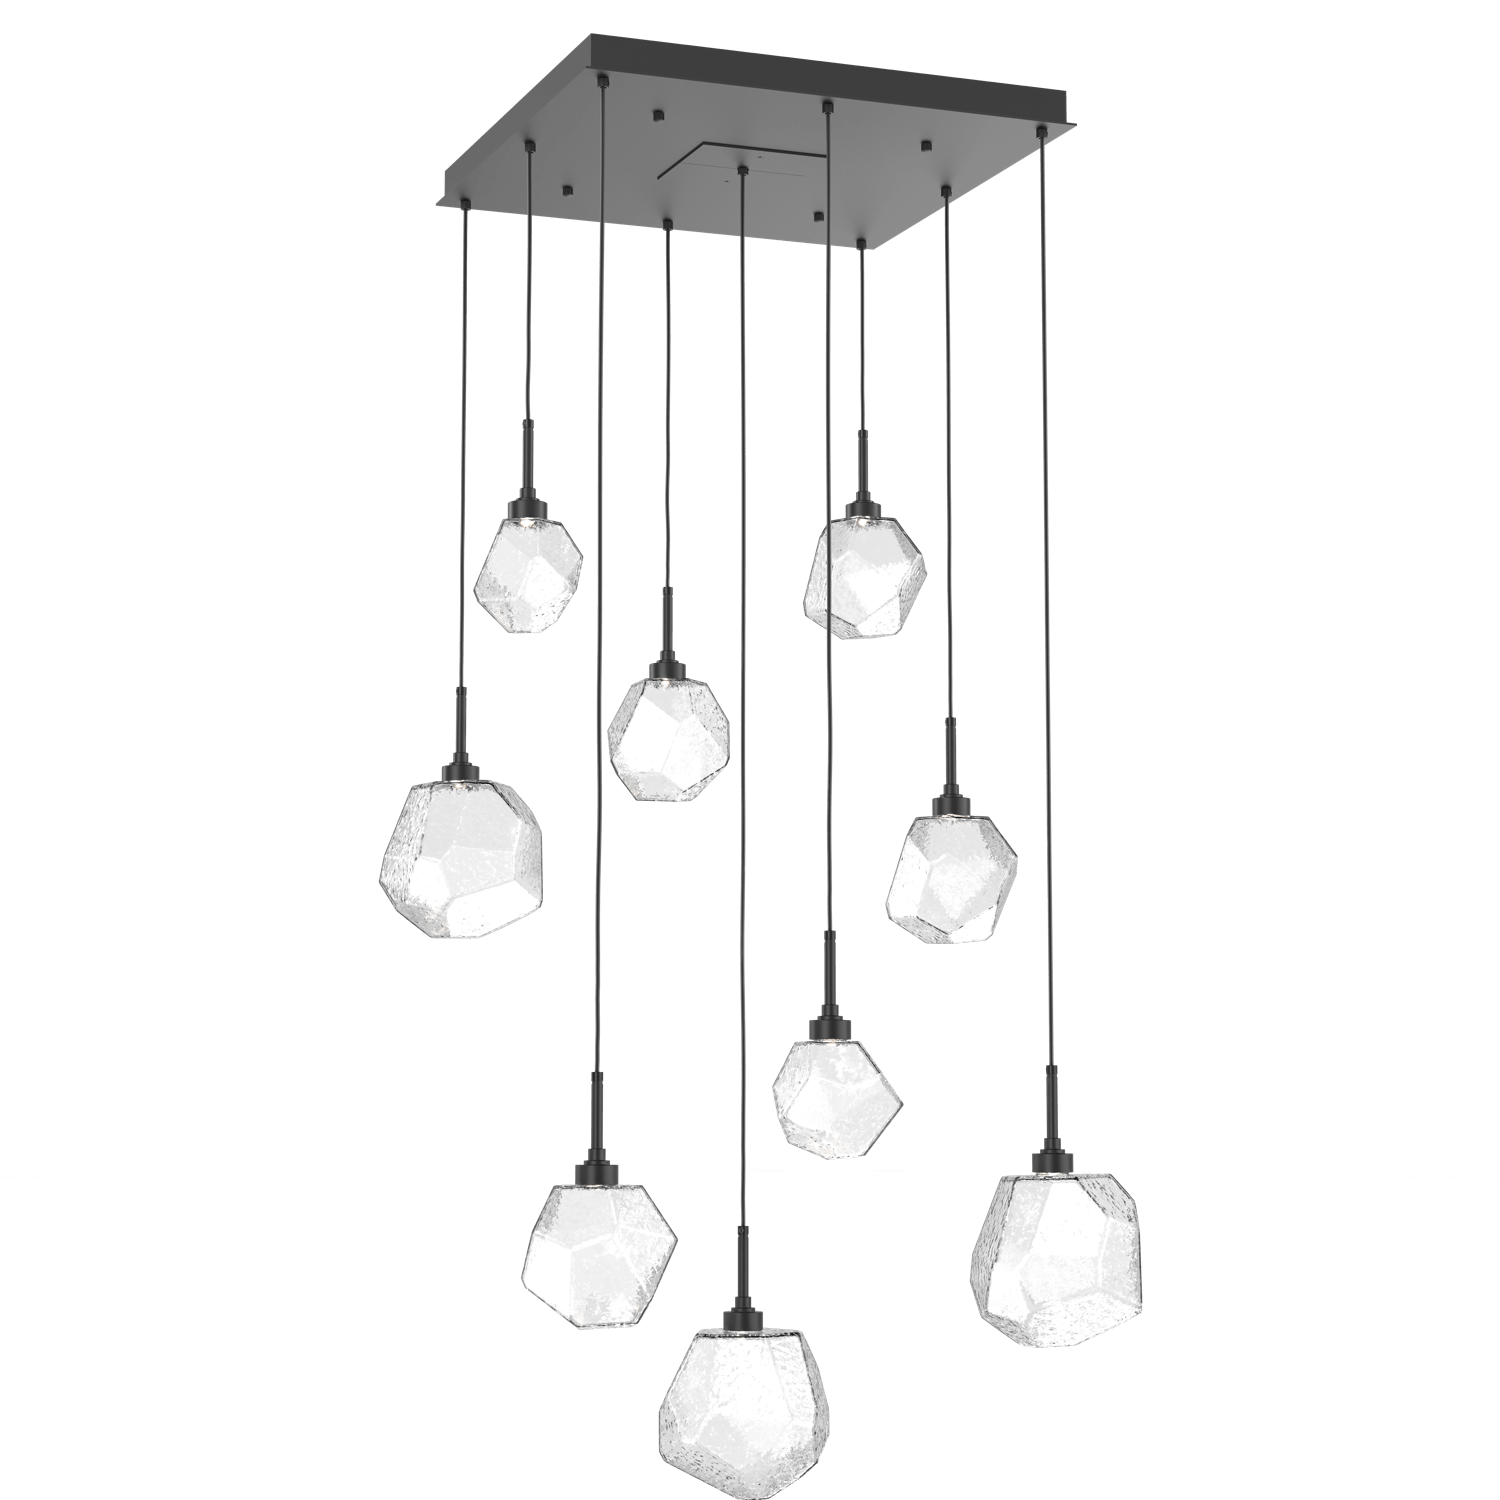 CHB0039-09-MB-C-Hammerton-Studio-Gem-9-light-square-pendant-chandelier-with-matte-black-finish-and-clear-blown-glass-shades-and-LED-lamping